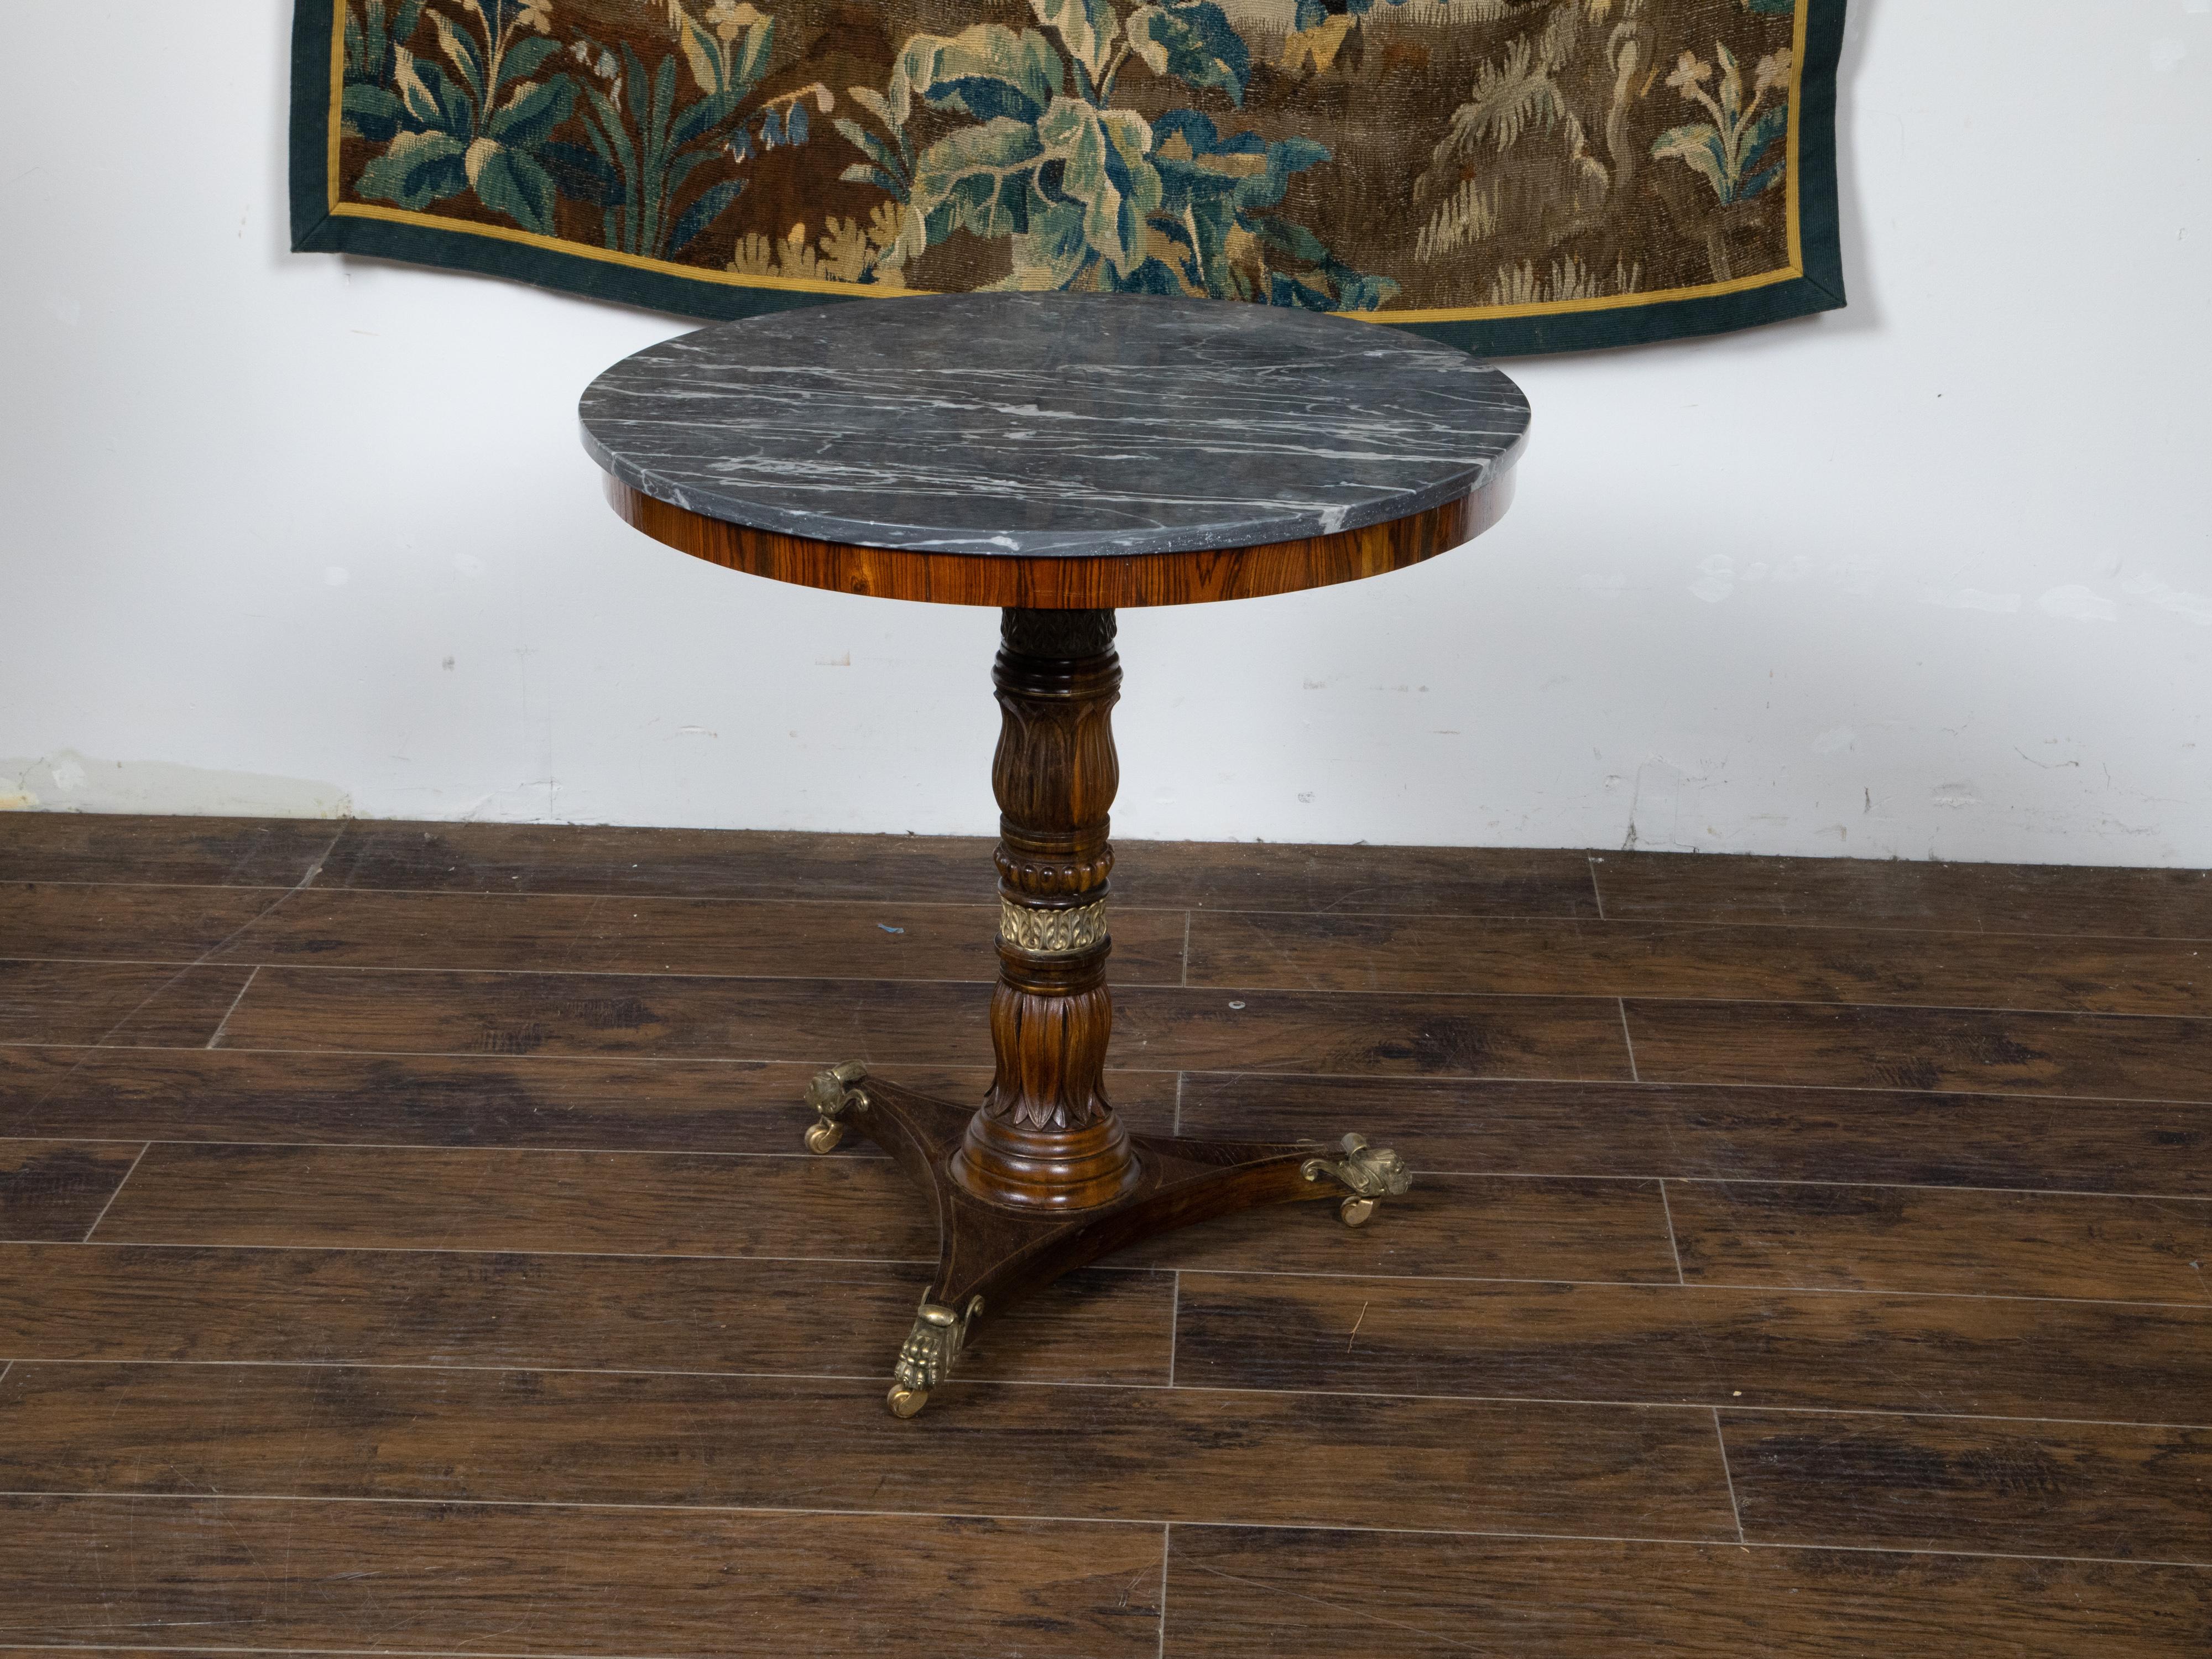 An English Regency period mahogany side table from the 19th century, with grey veined marble top, carved pedestal, tripod base and brass lion paw feet. Created in England during the Regency period, this mahogany side table features a circular top